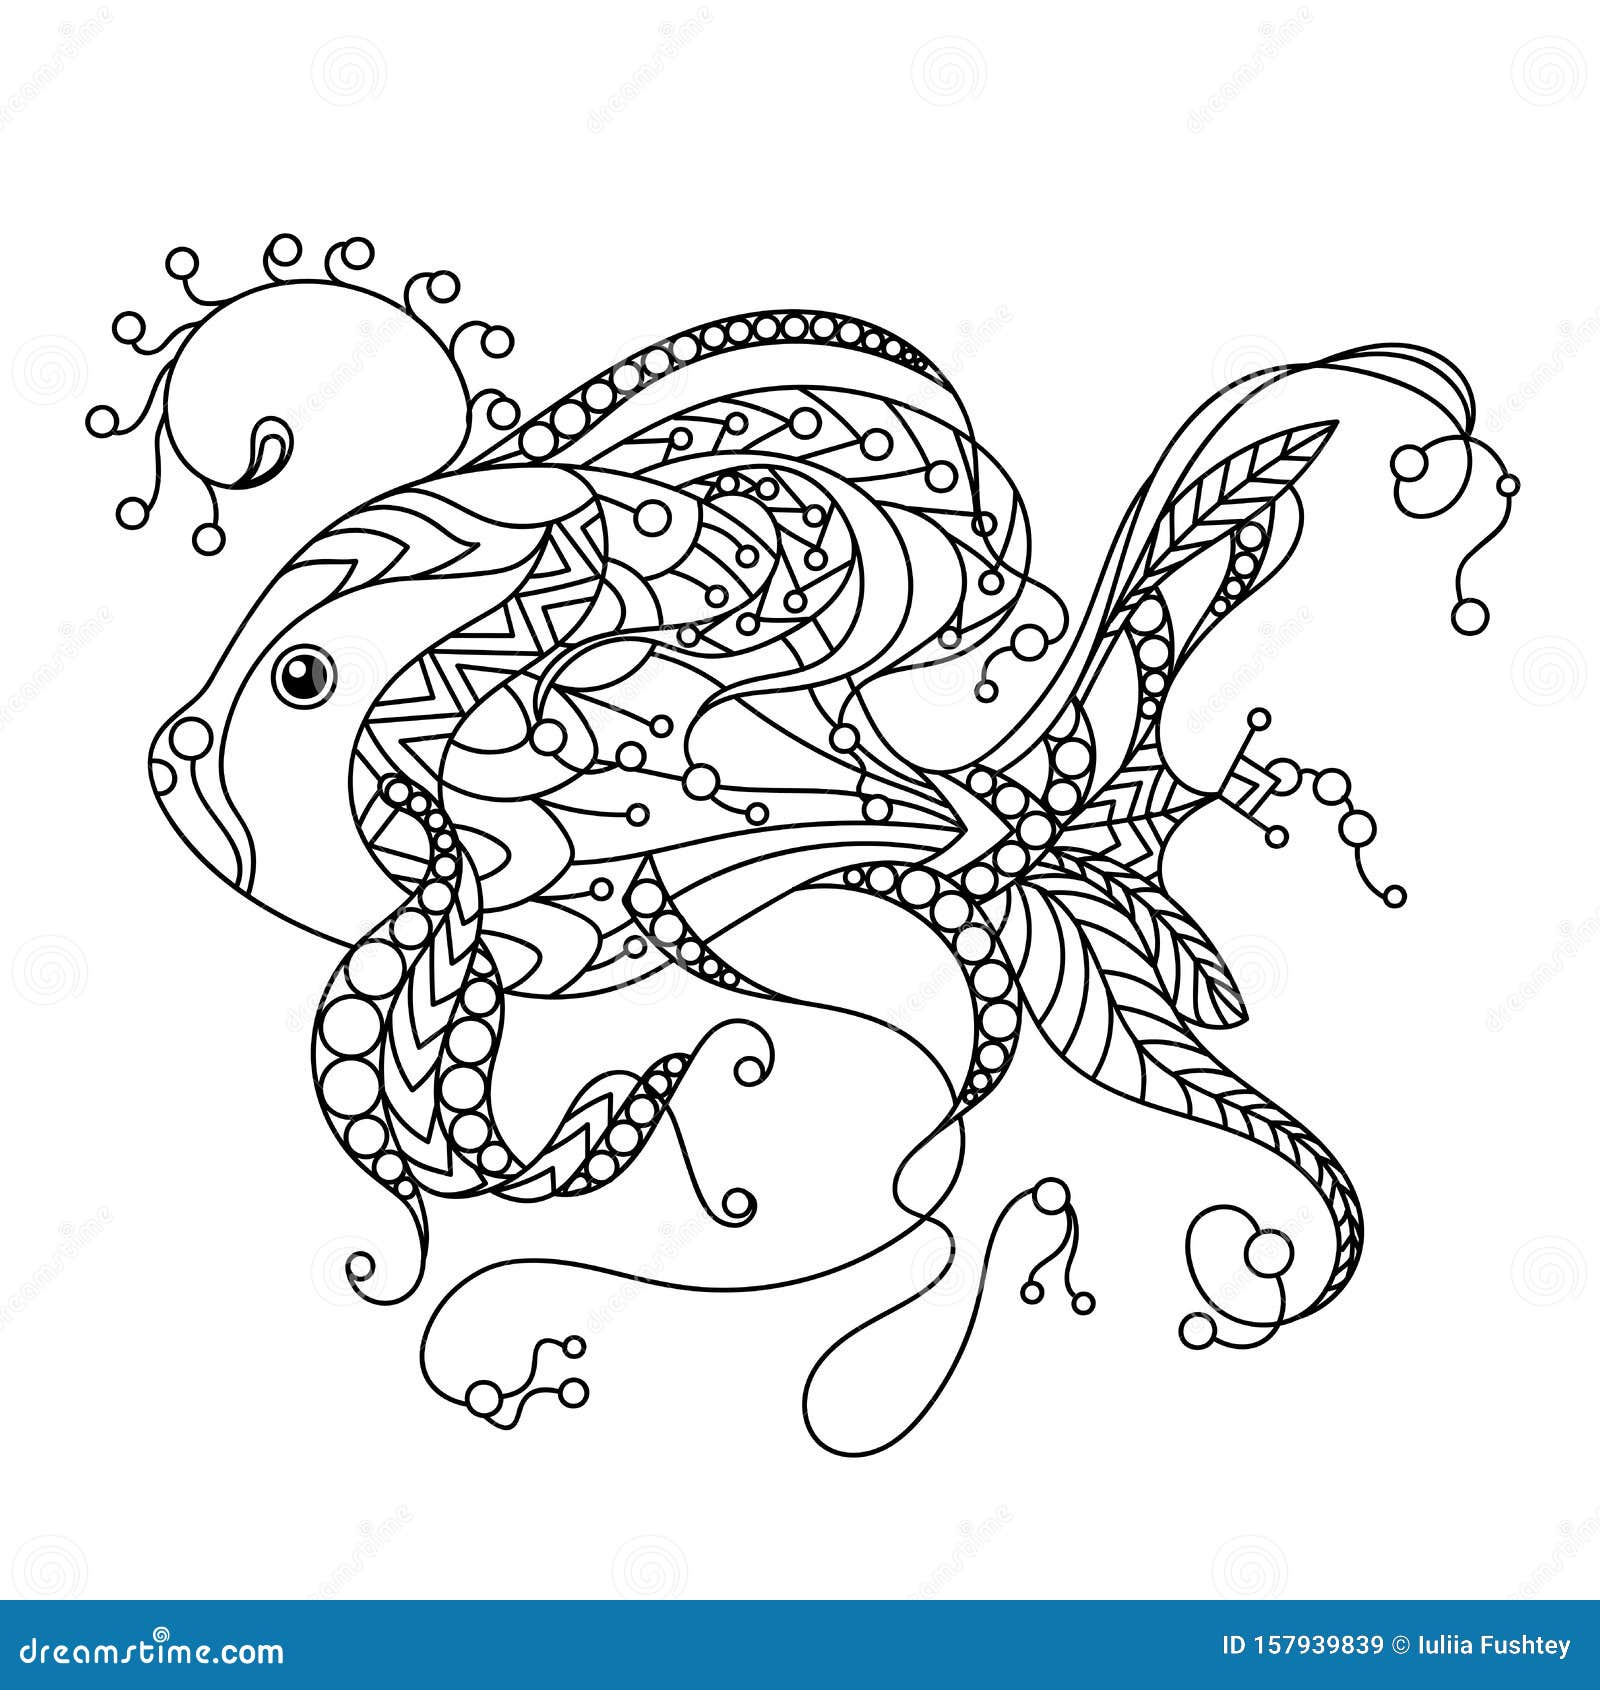 Fish in Vector Illustration Doodle Coloring Book Stock Illustration ...